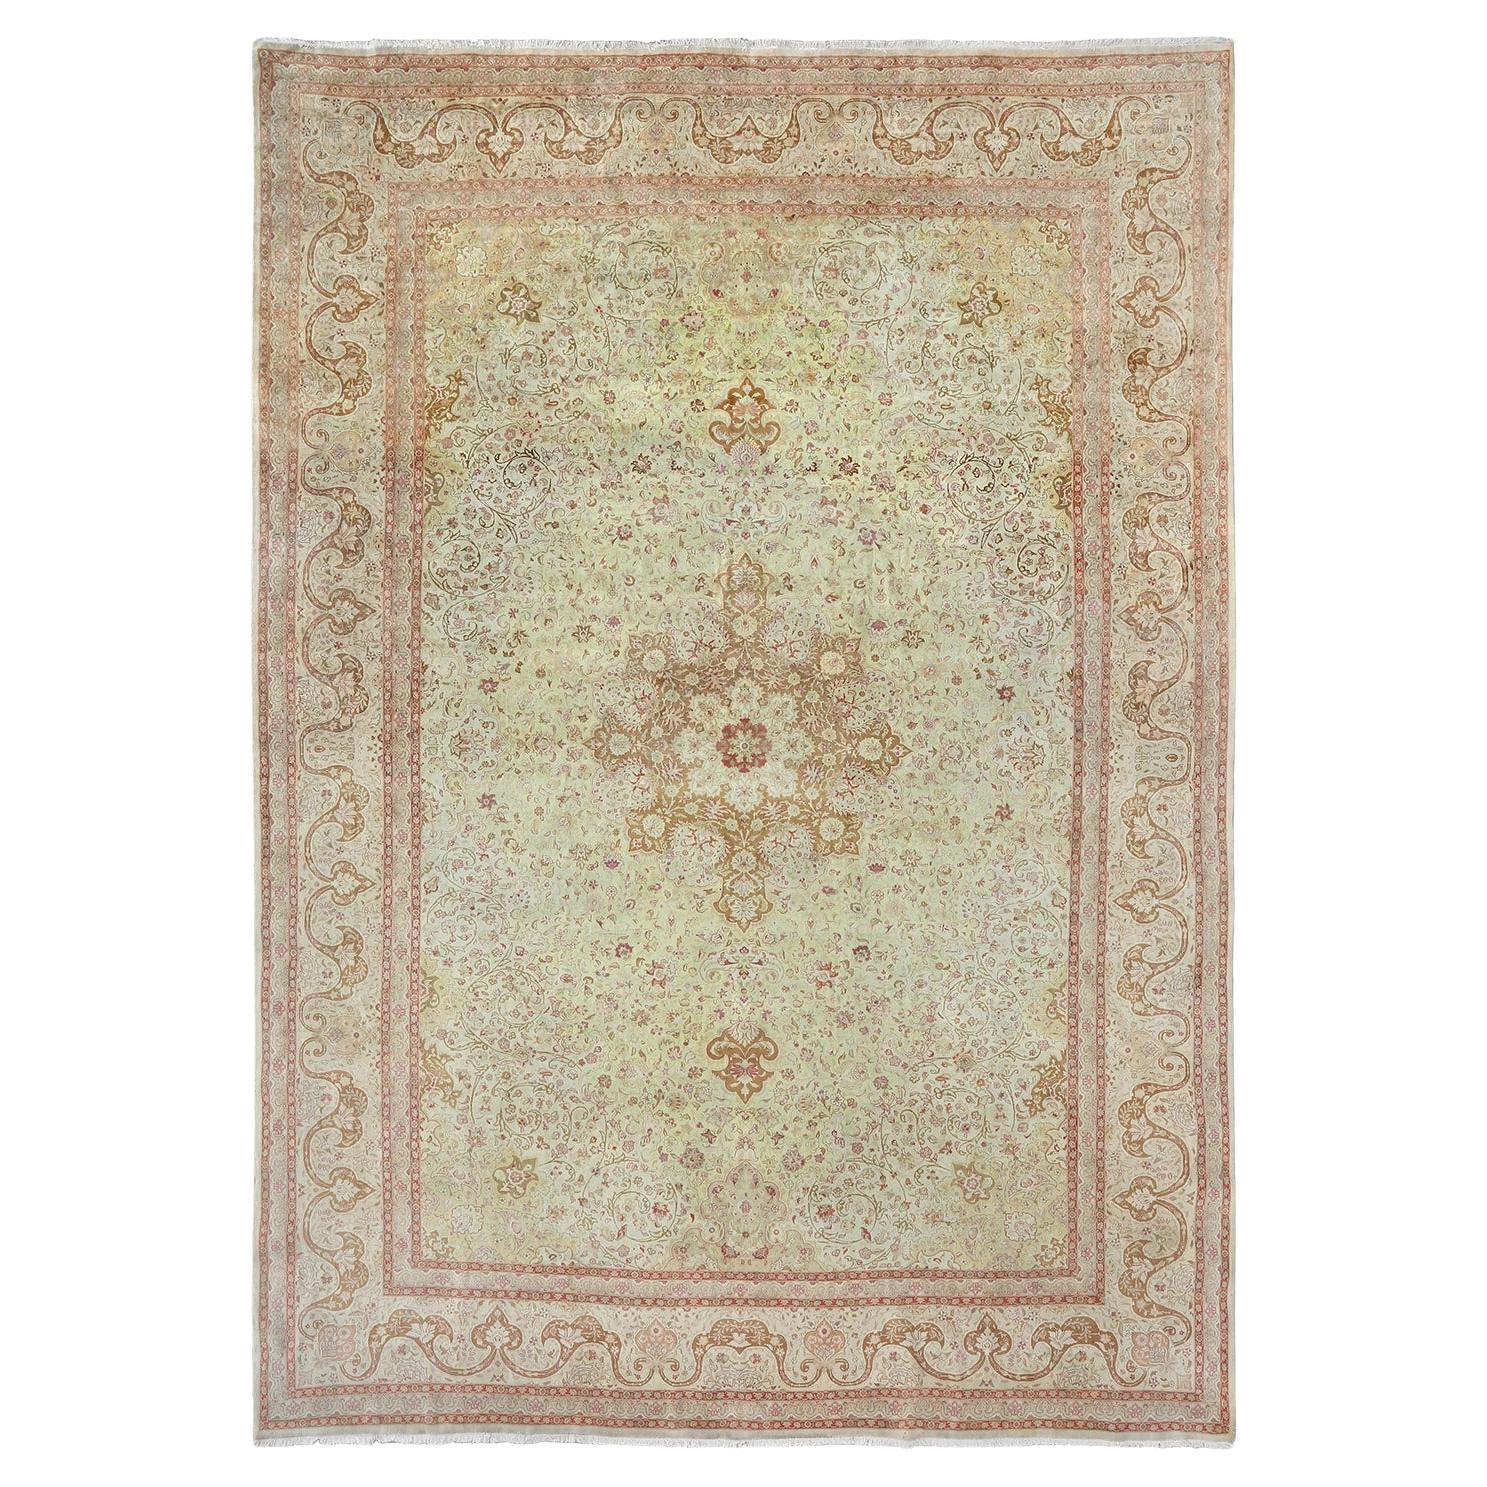 Vintage Persian Tabriz - Size: 16 ft 1 in x 11 ft 7 in